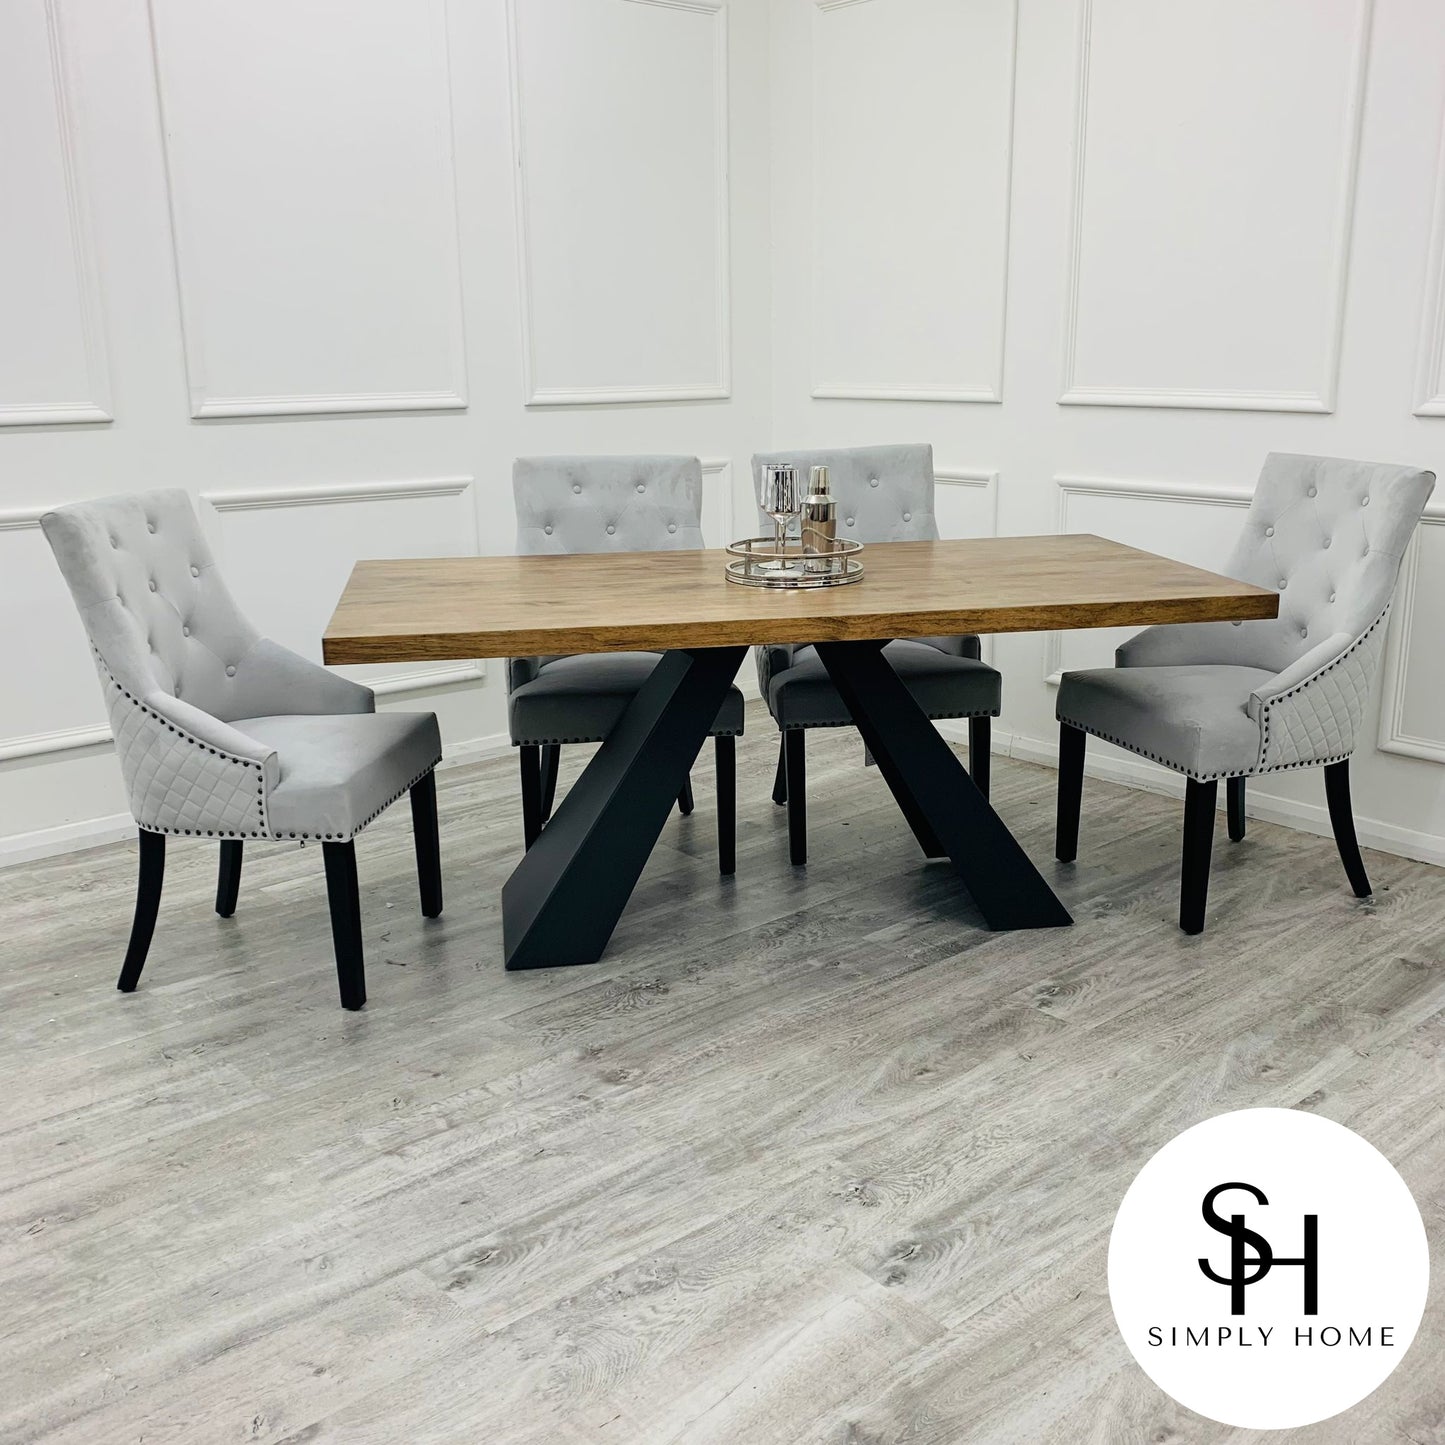 Axel 1.8m Dining Table with Bentley Black Leg Dining Chairs